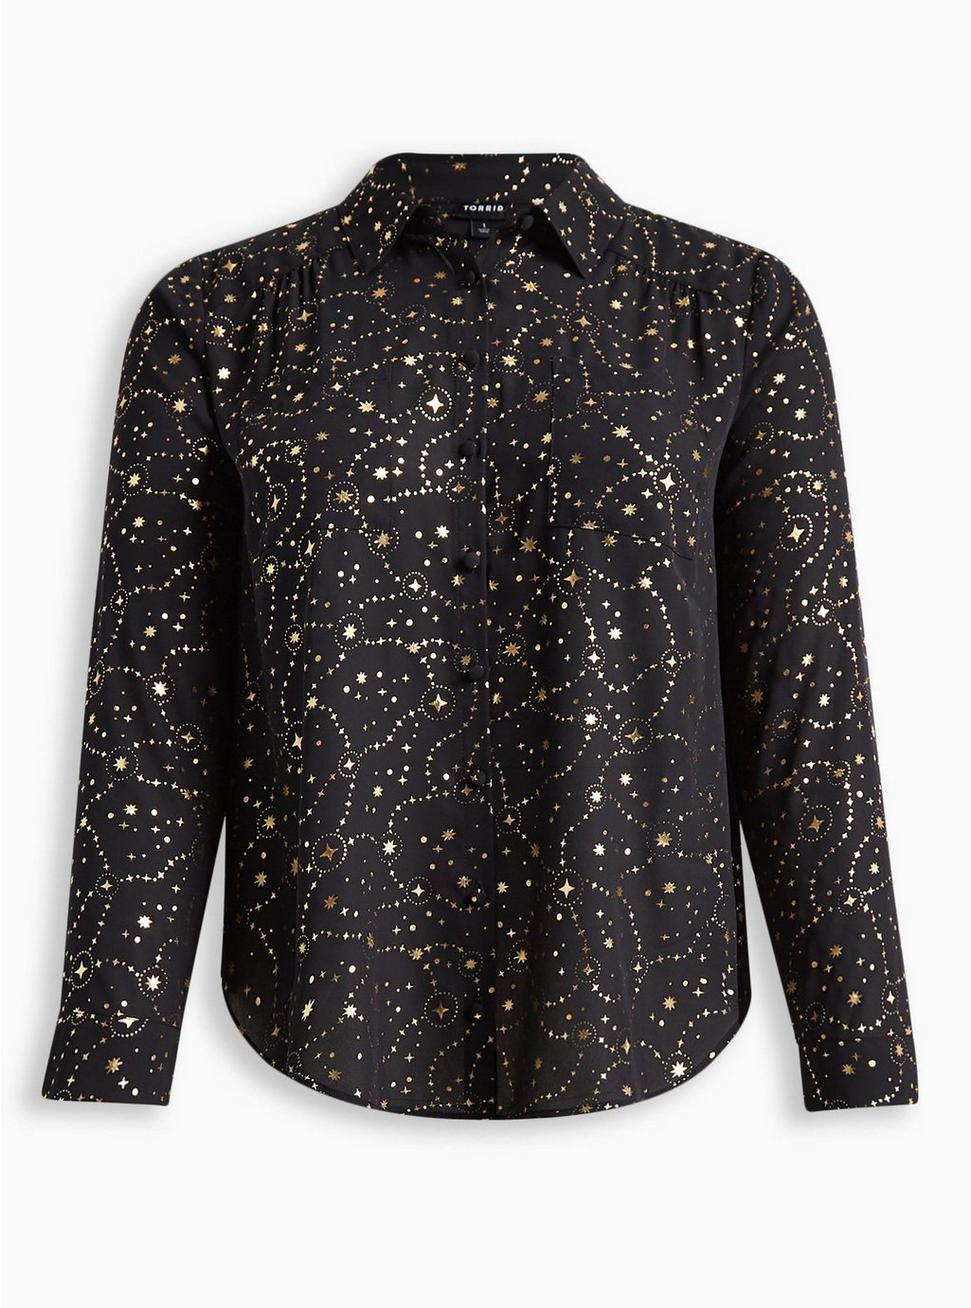 Madison Georgette Button-Up Long Sleeve Shirt, BLACK GALAXY, hi-res